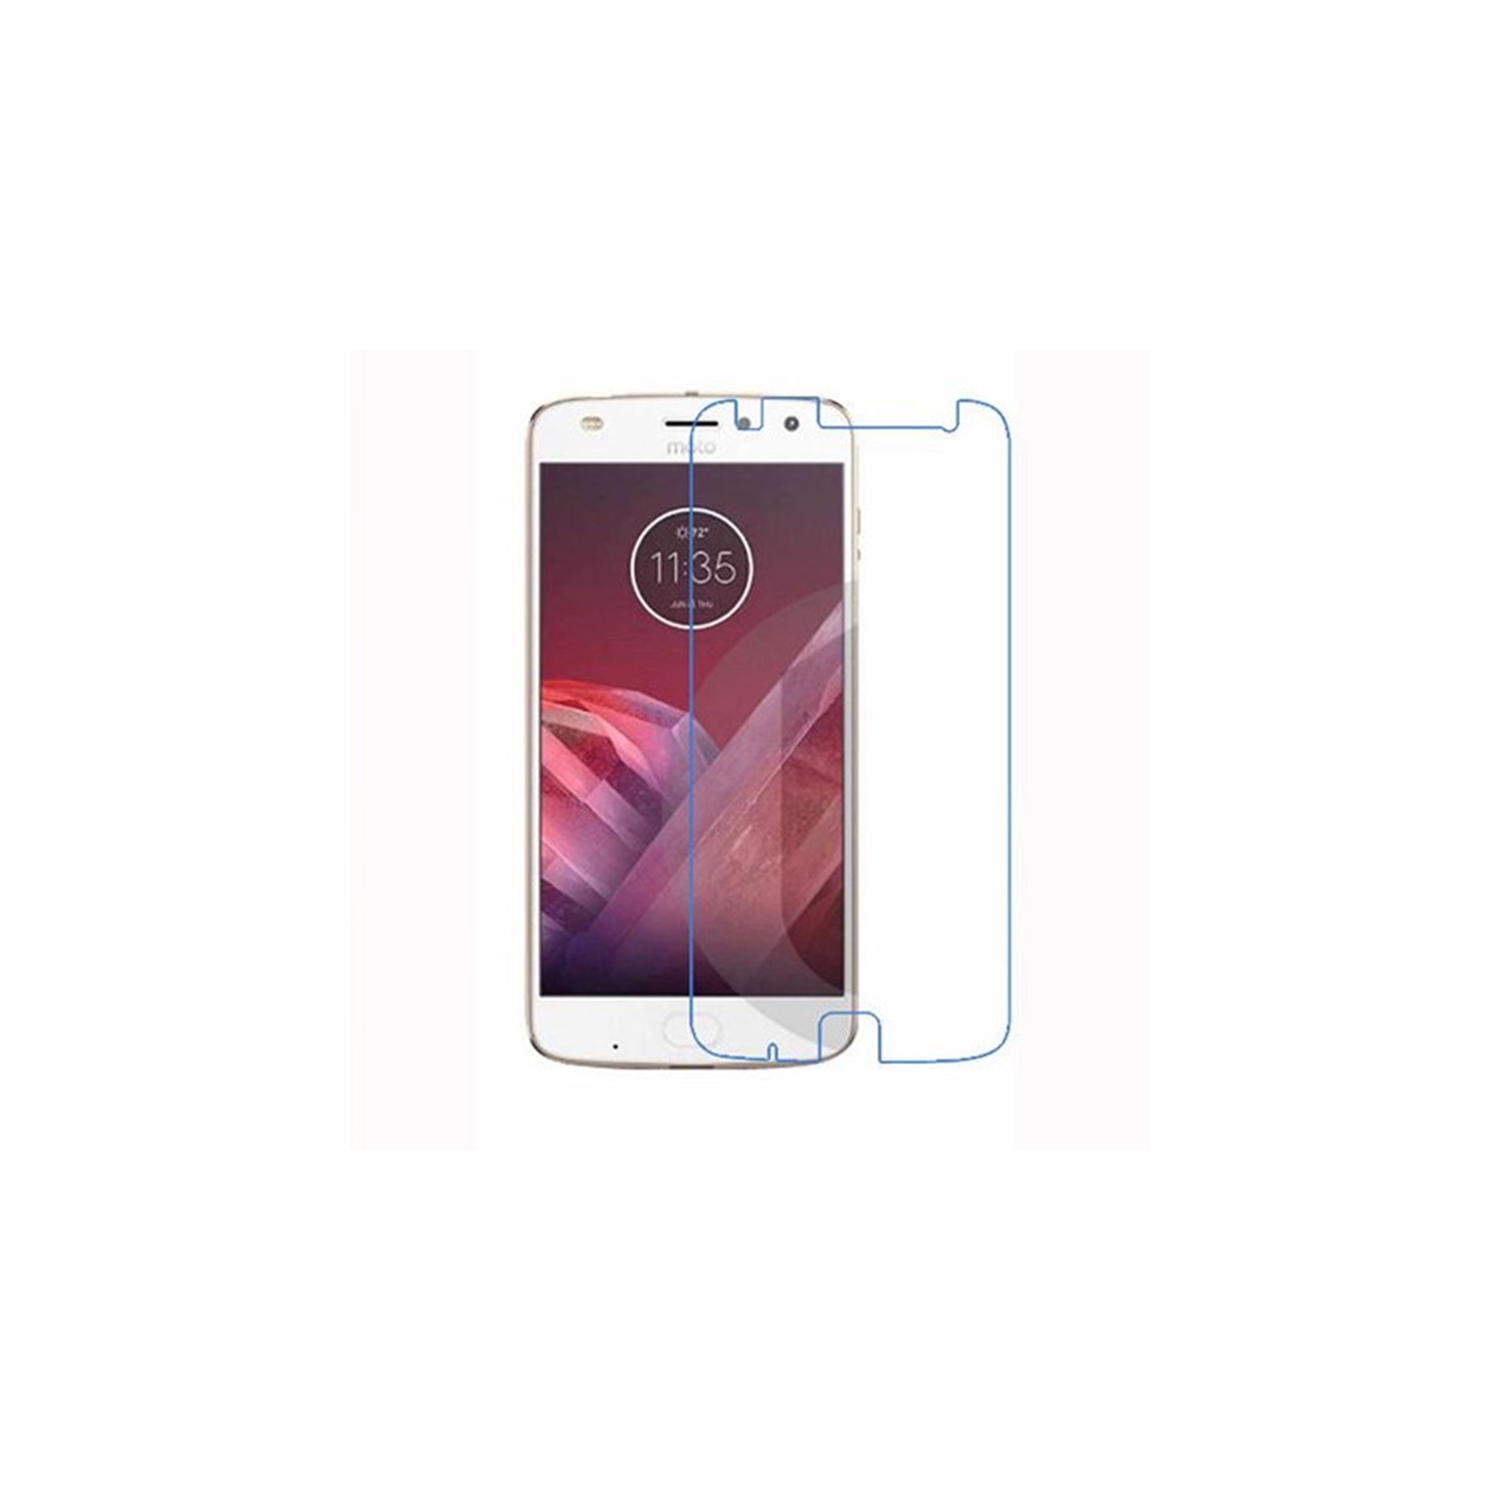 【2 Packs】 CSmart Premium Tempered Glass Screen Protector for Motorola Moto Z2 Play, Case Friendly & Bubble Free